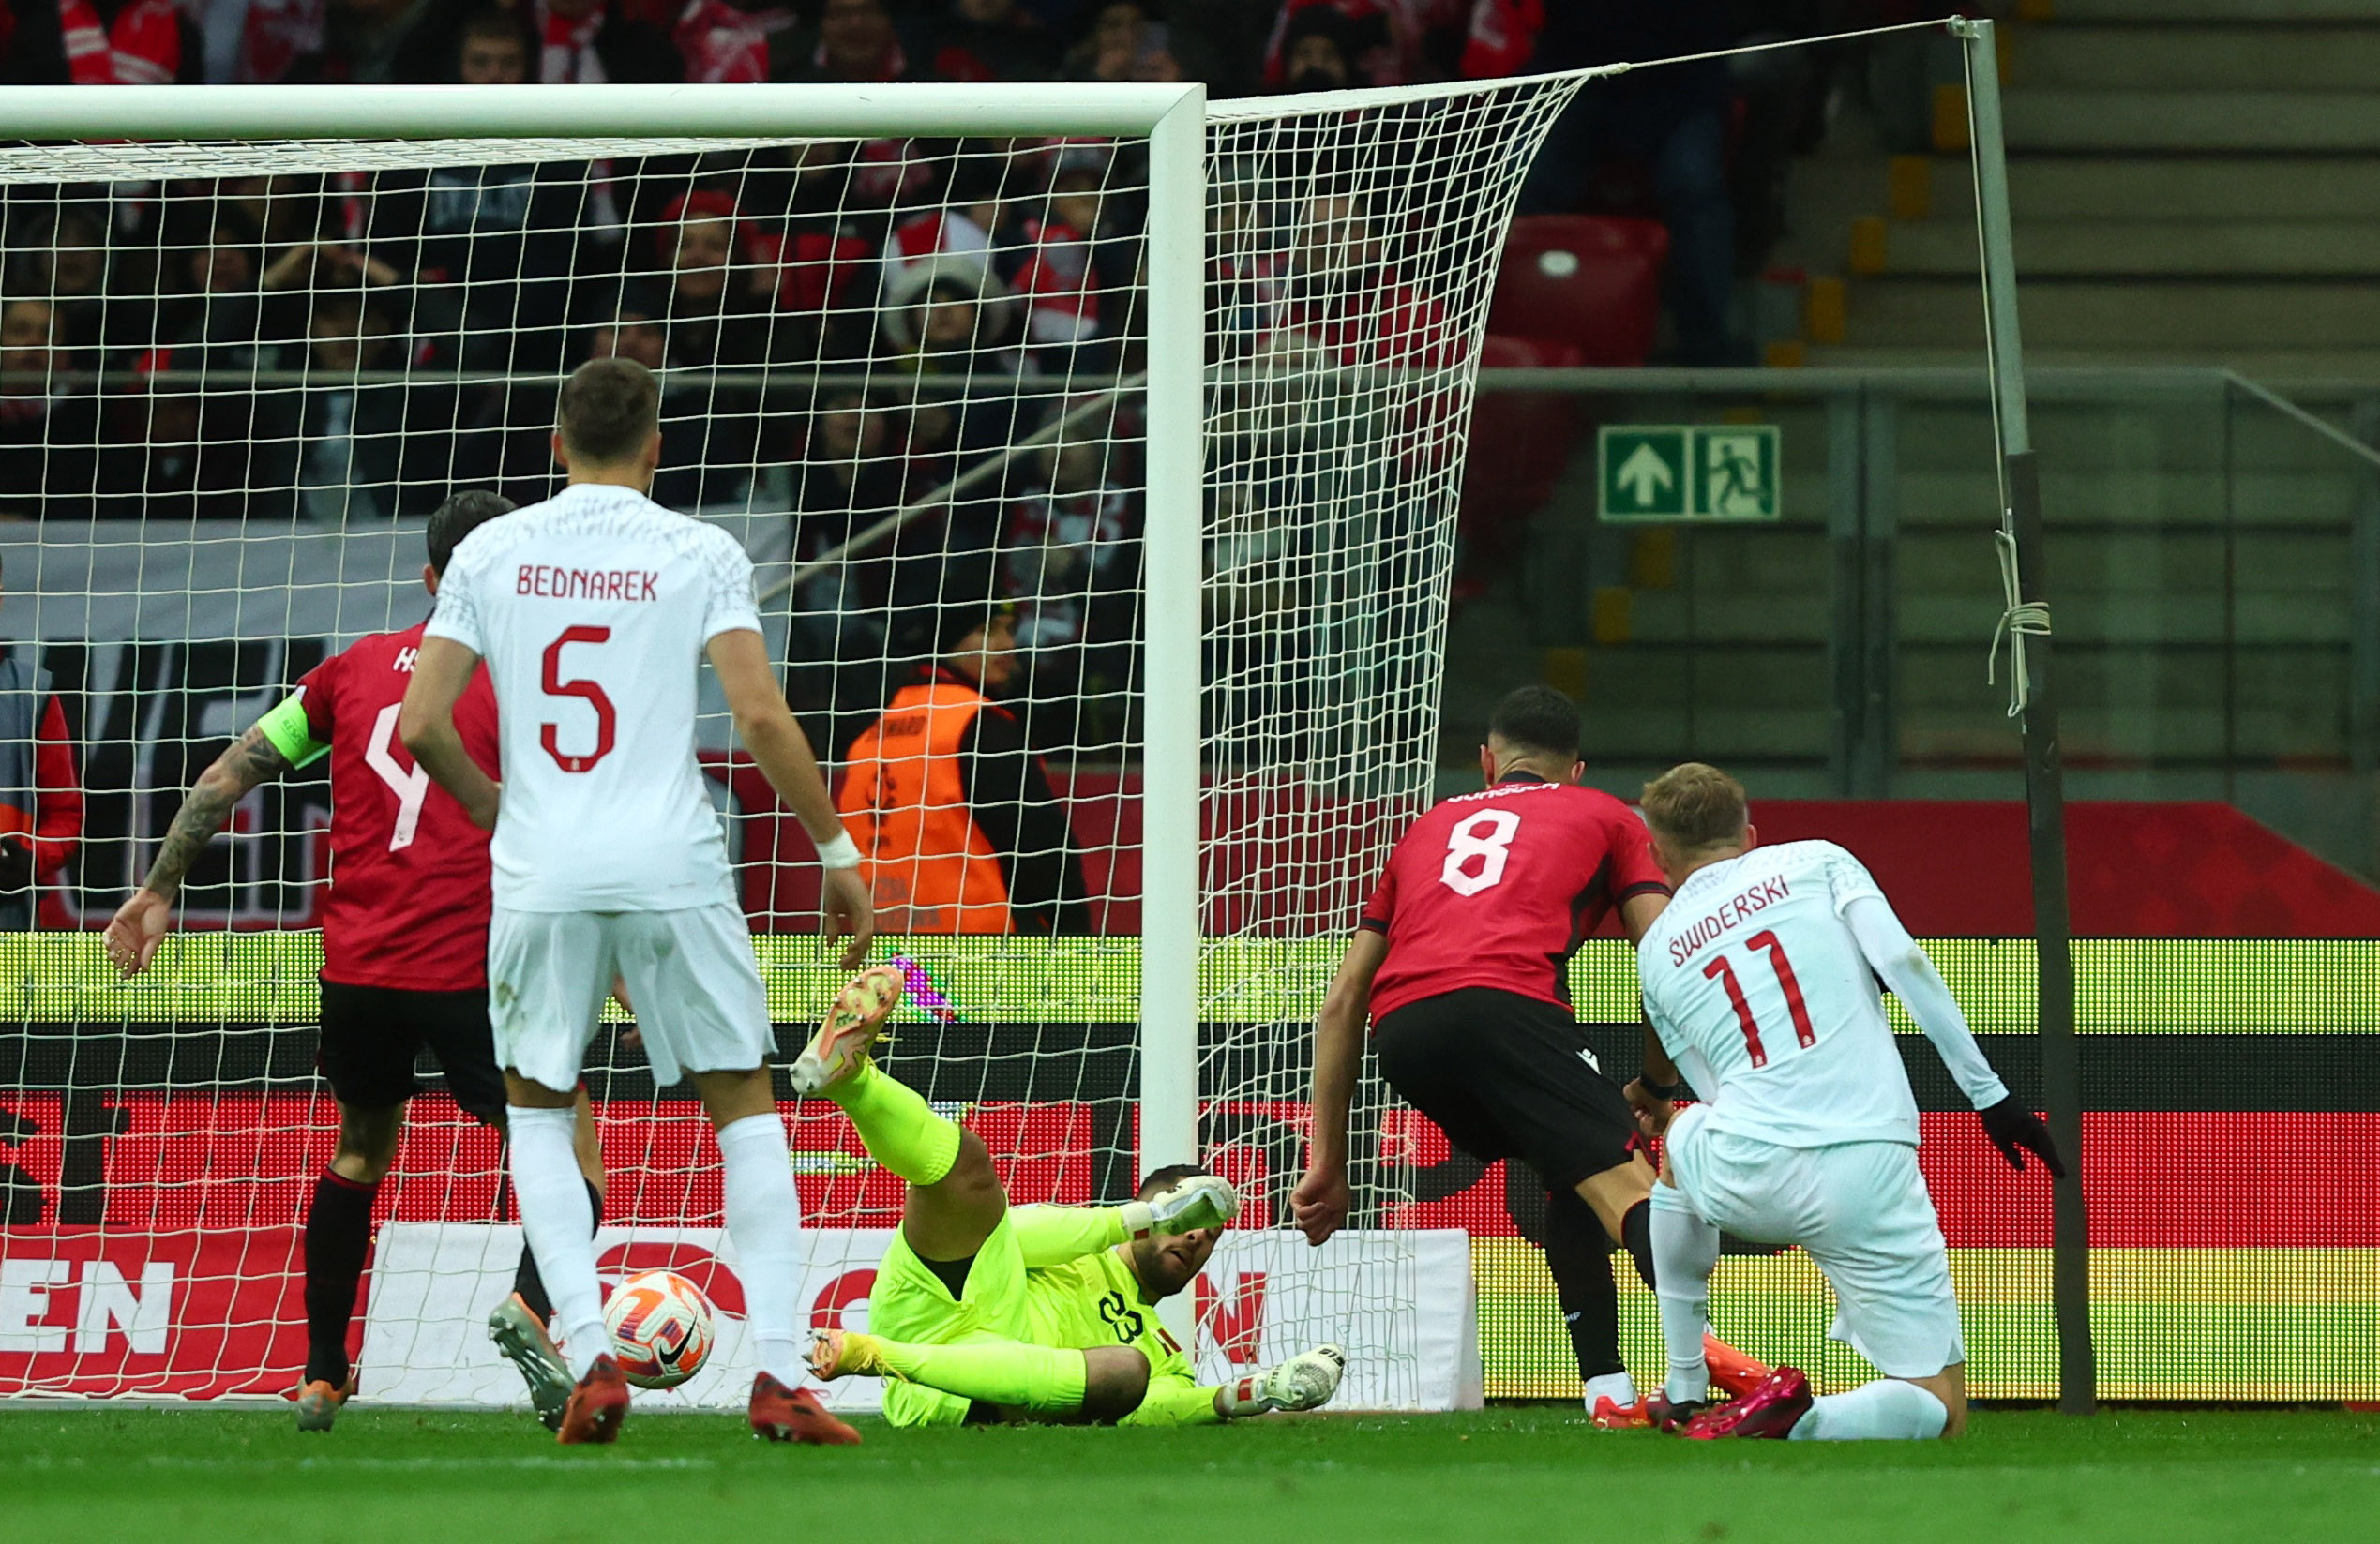 Poland's Swiderski secures 10 win over Albania in Euro qualifier Reuters